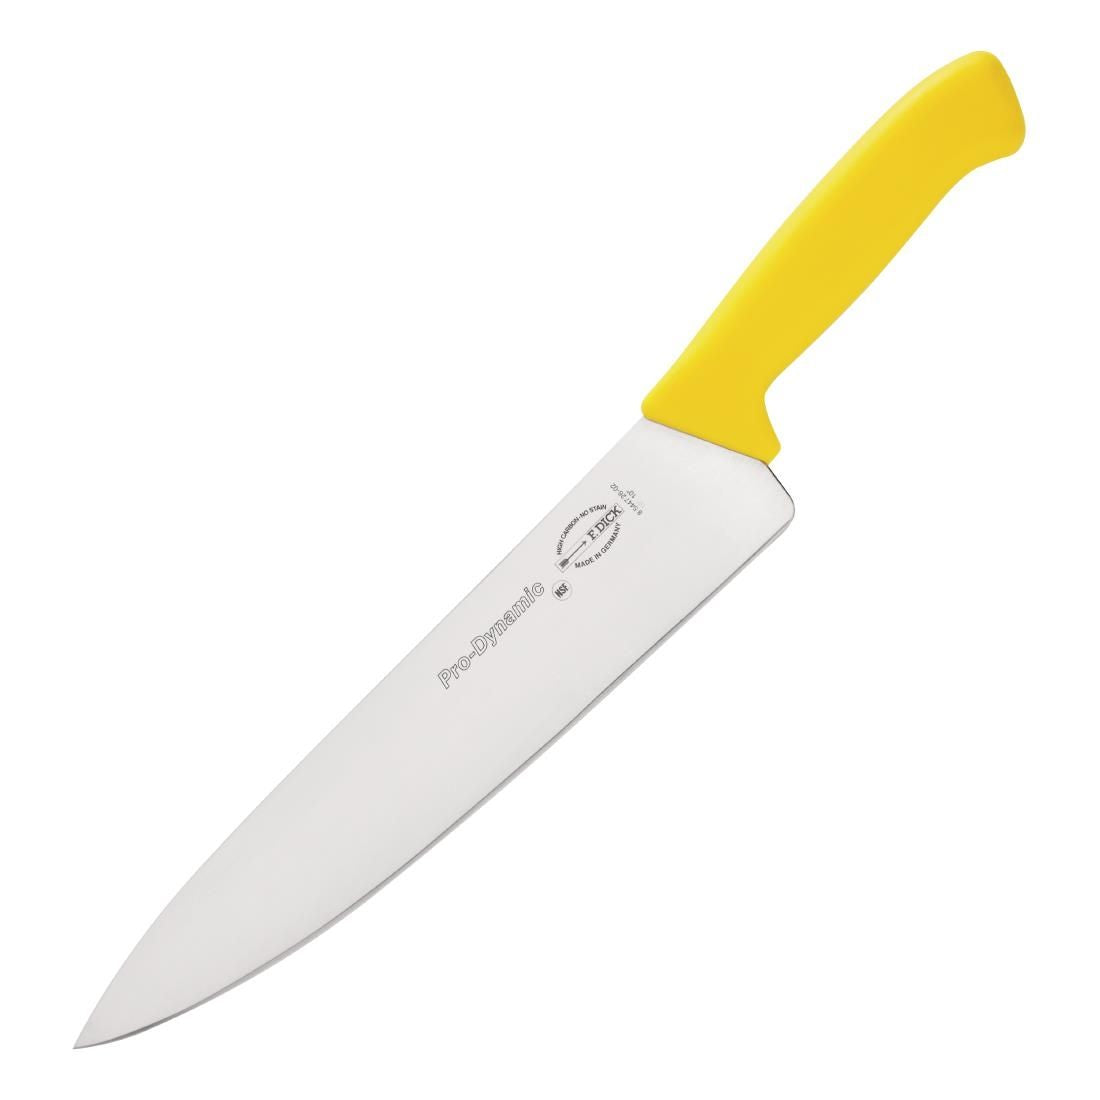 DL360 Dick Pro Dynamic HACCP Chefs Knife Yellow 25.5cm JD Catering Equipment Solutions Ltd